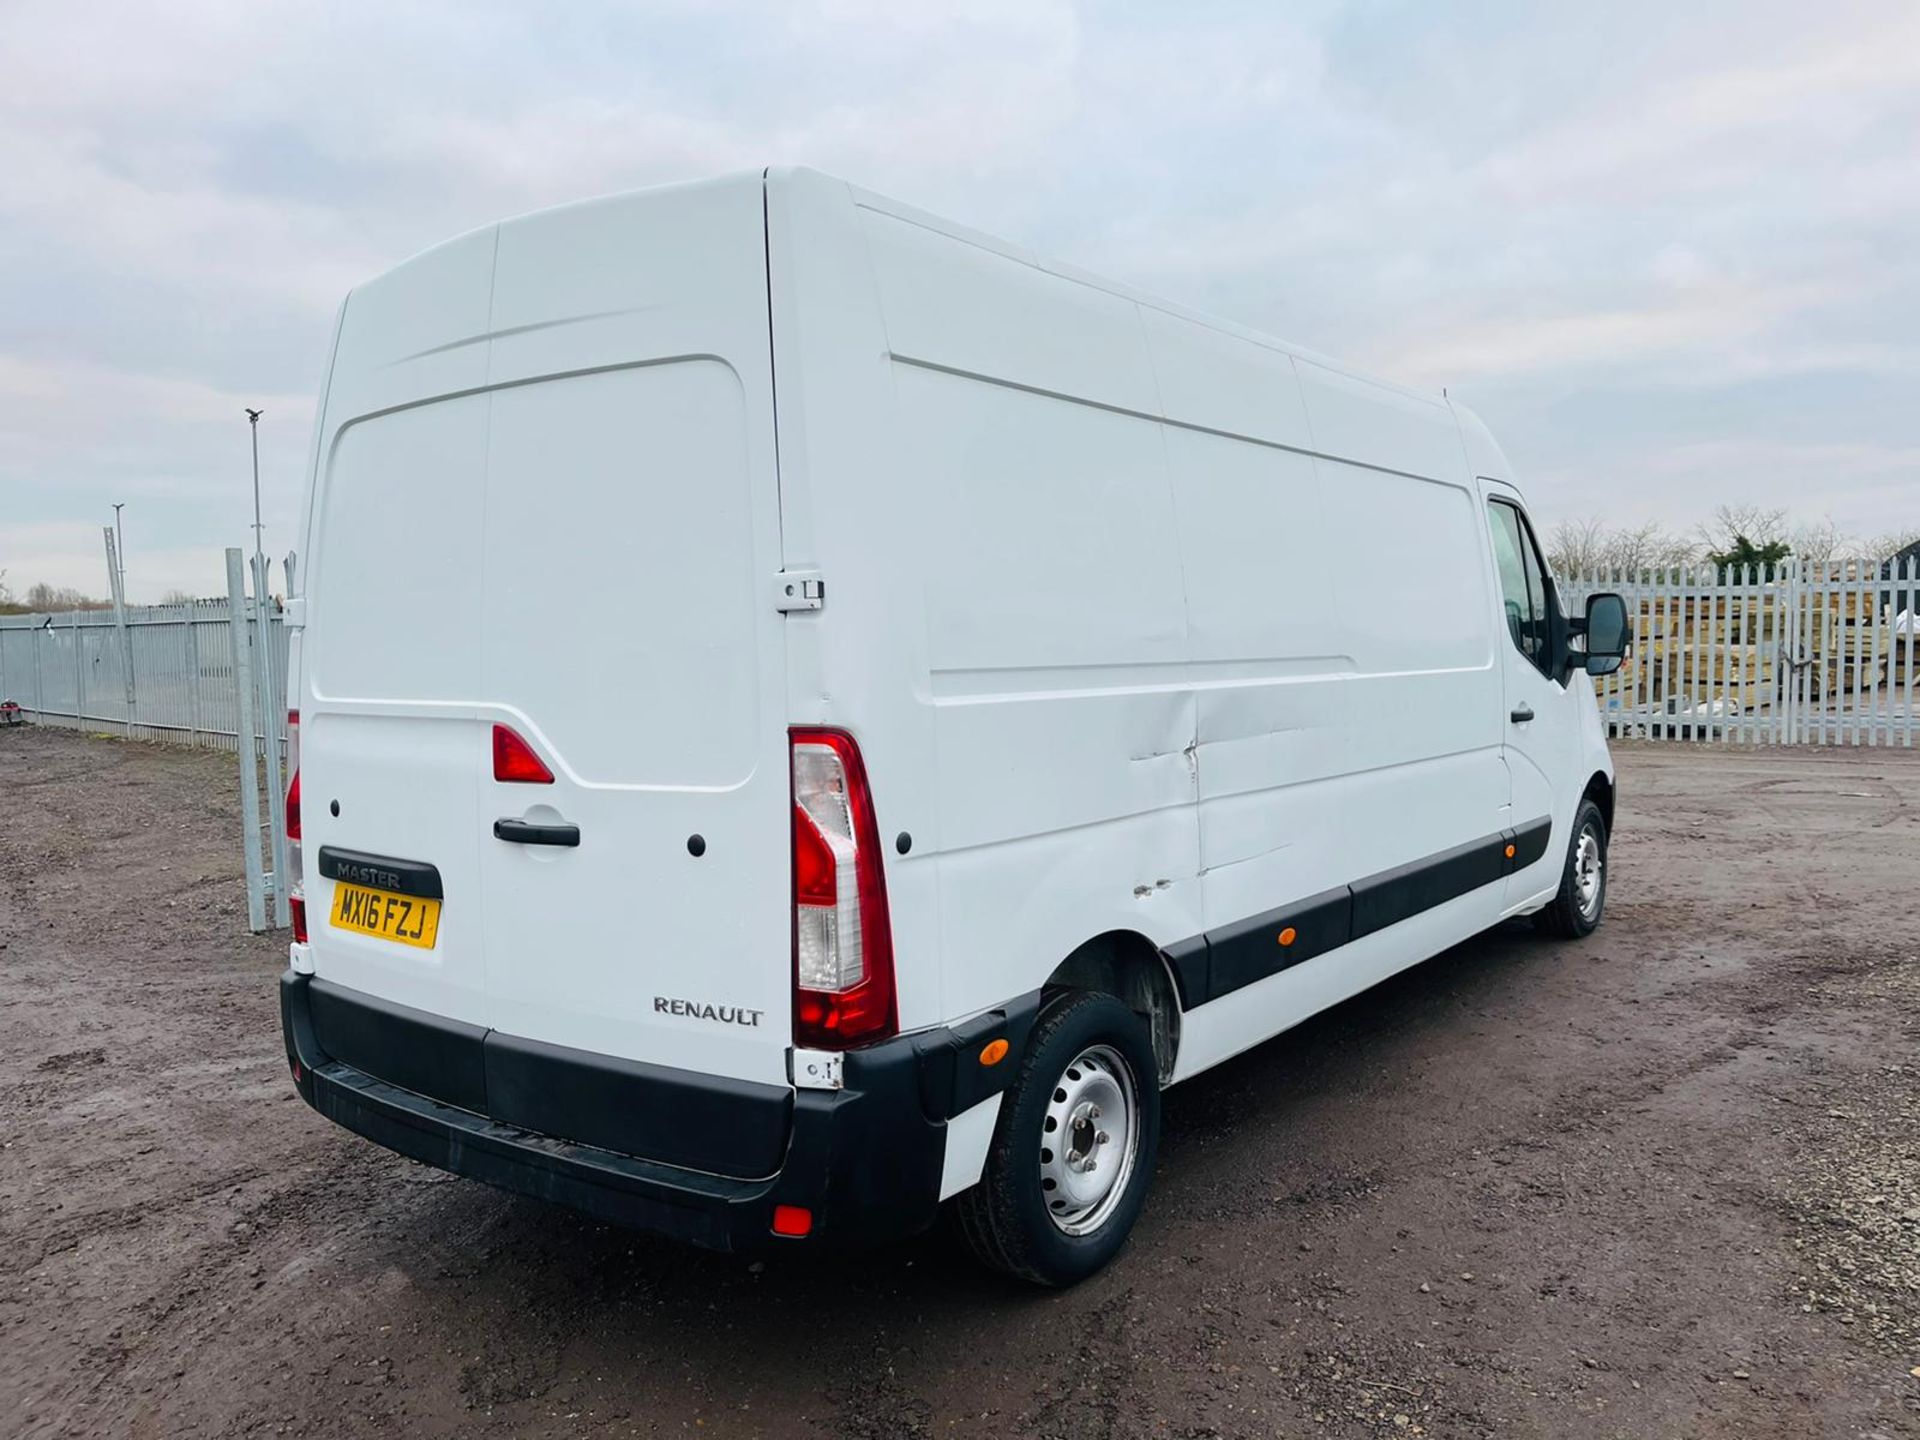 Renault Master 2.3 DCI 110 Business LM35 L3 H2 2016 '16 reg' Fridge/Freezer - Fully Insulated - Image 14 of 23